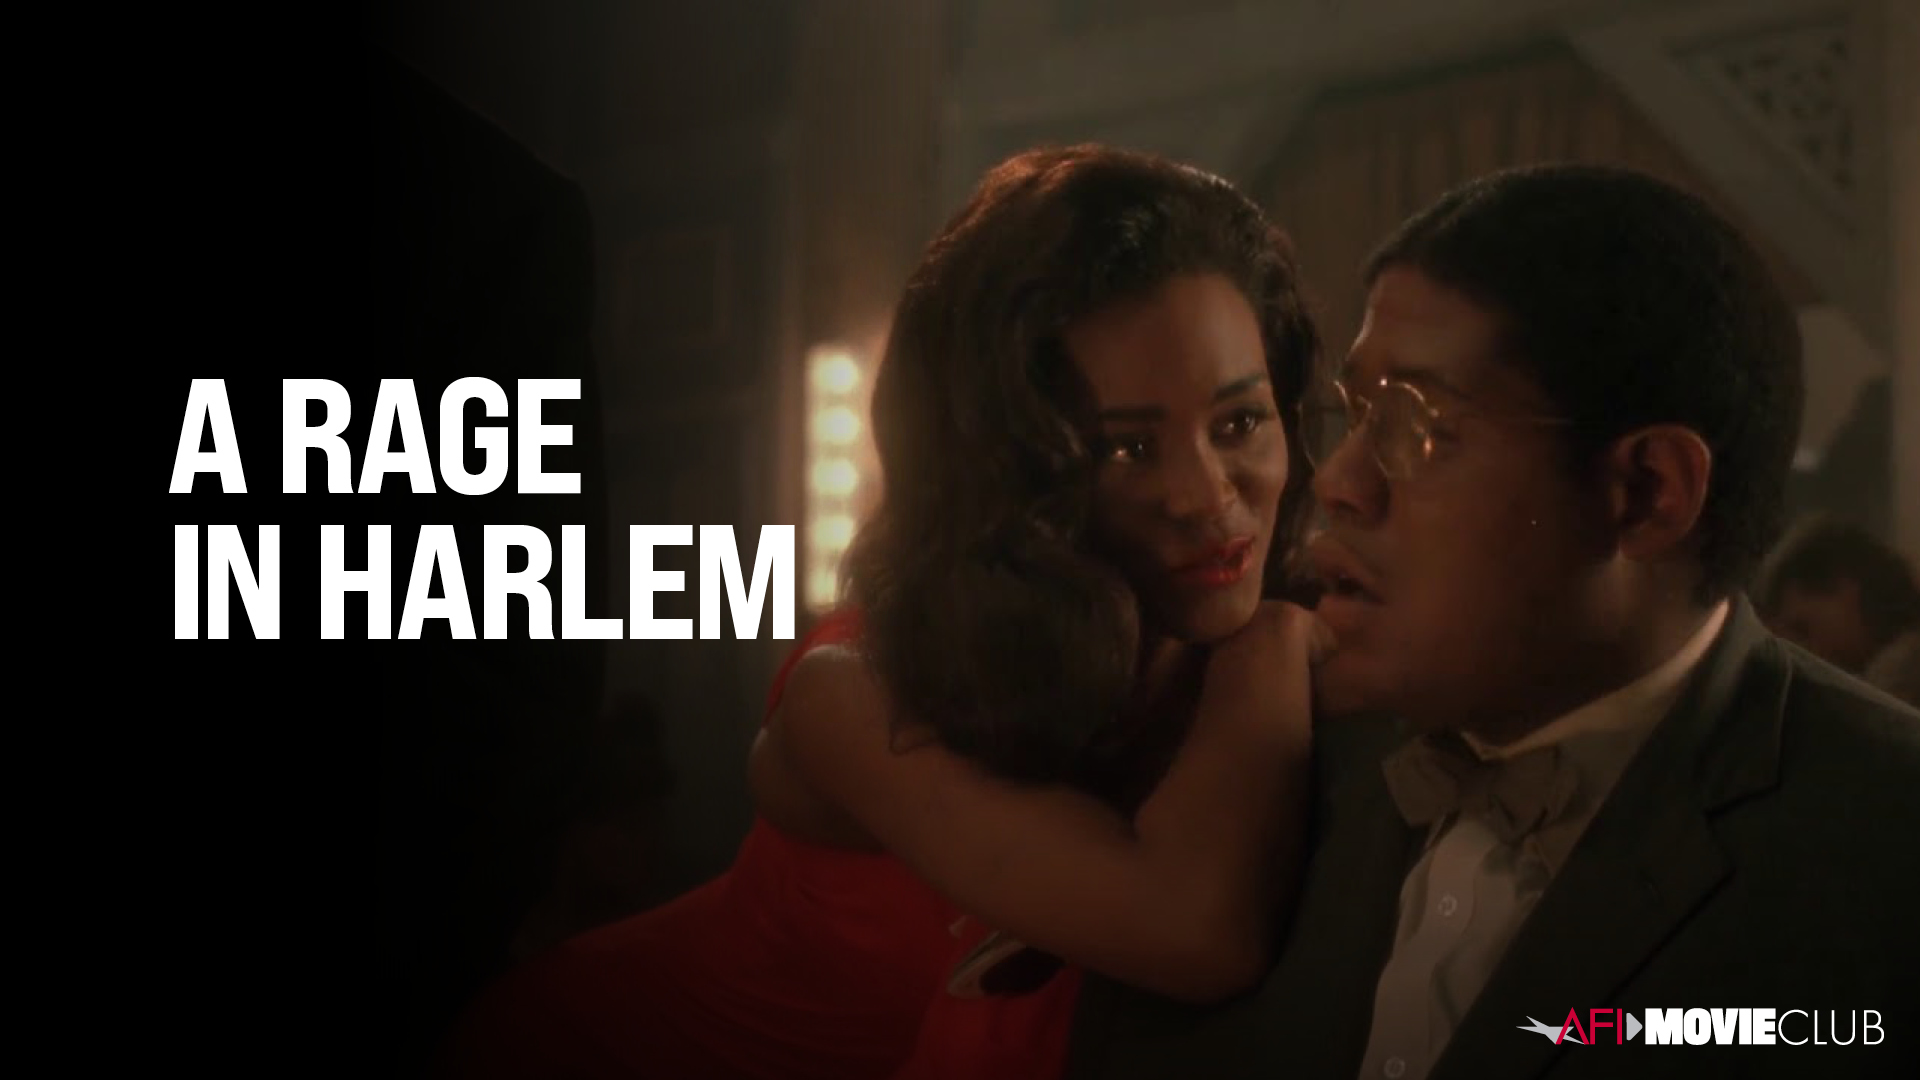 A Rage In Harlem Film Still - Forest Whitaker and Robin Givens